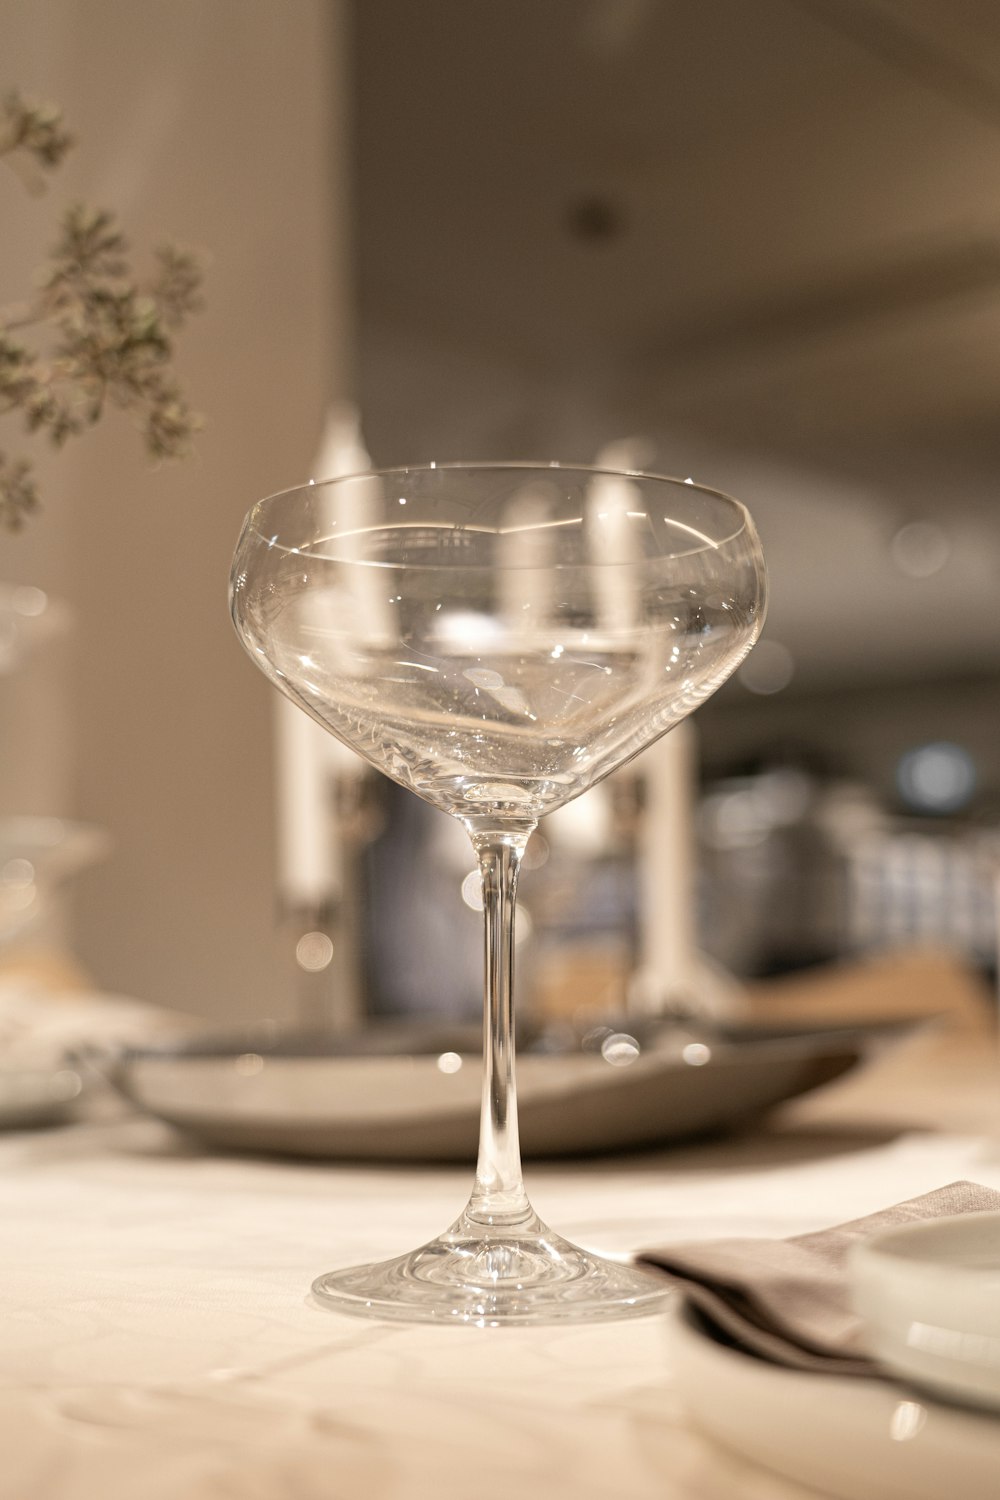 a close up of a wine glass on a table